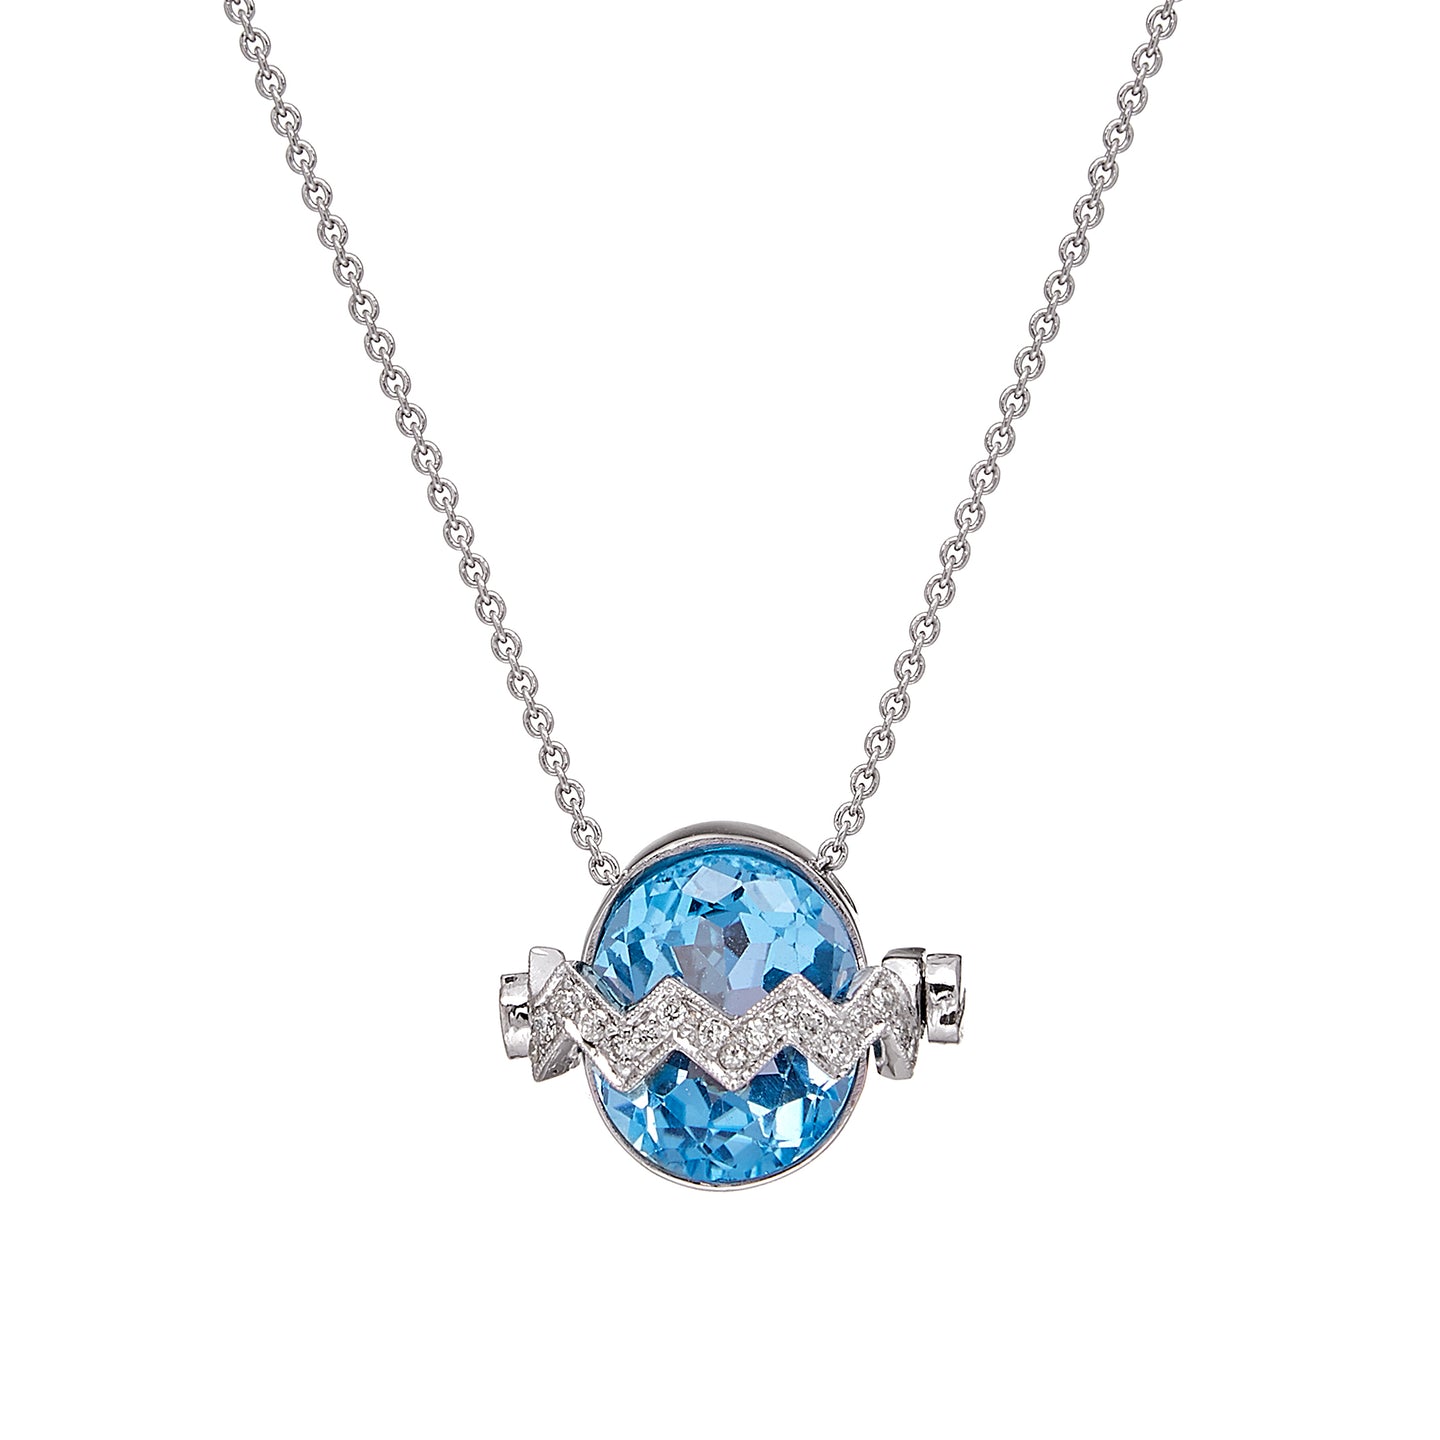 BLUE GIRL NECKLACE